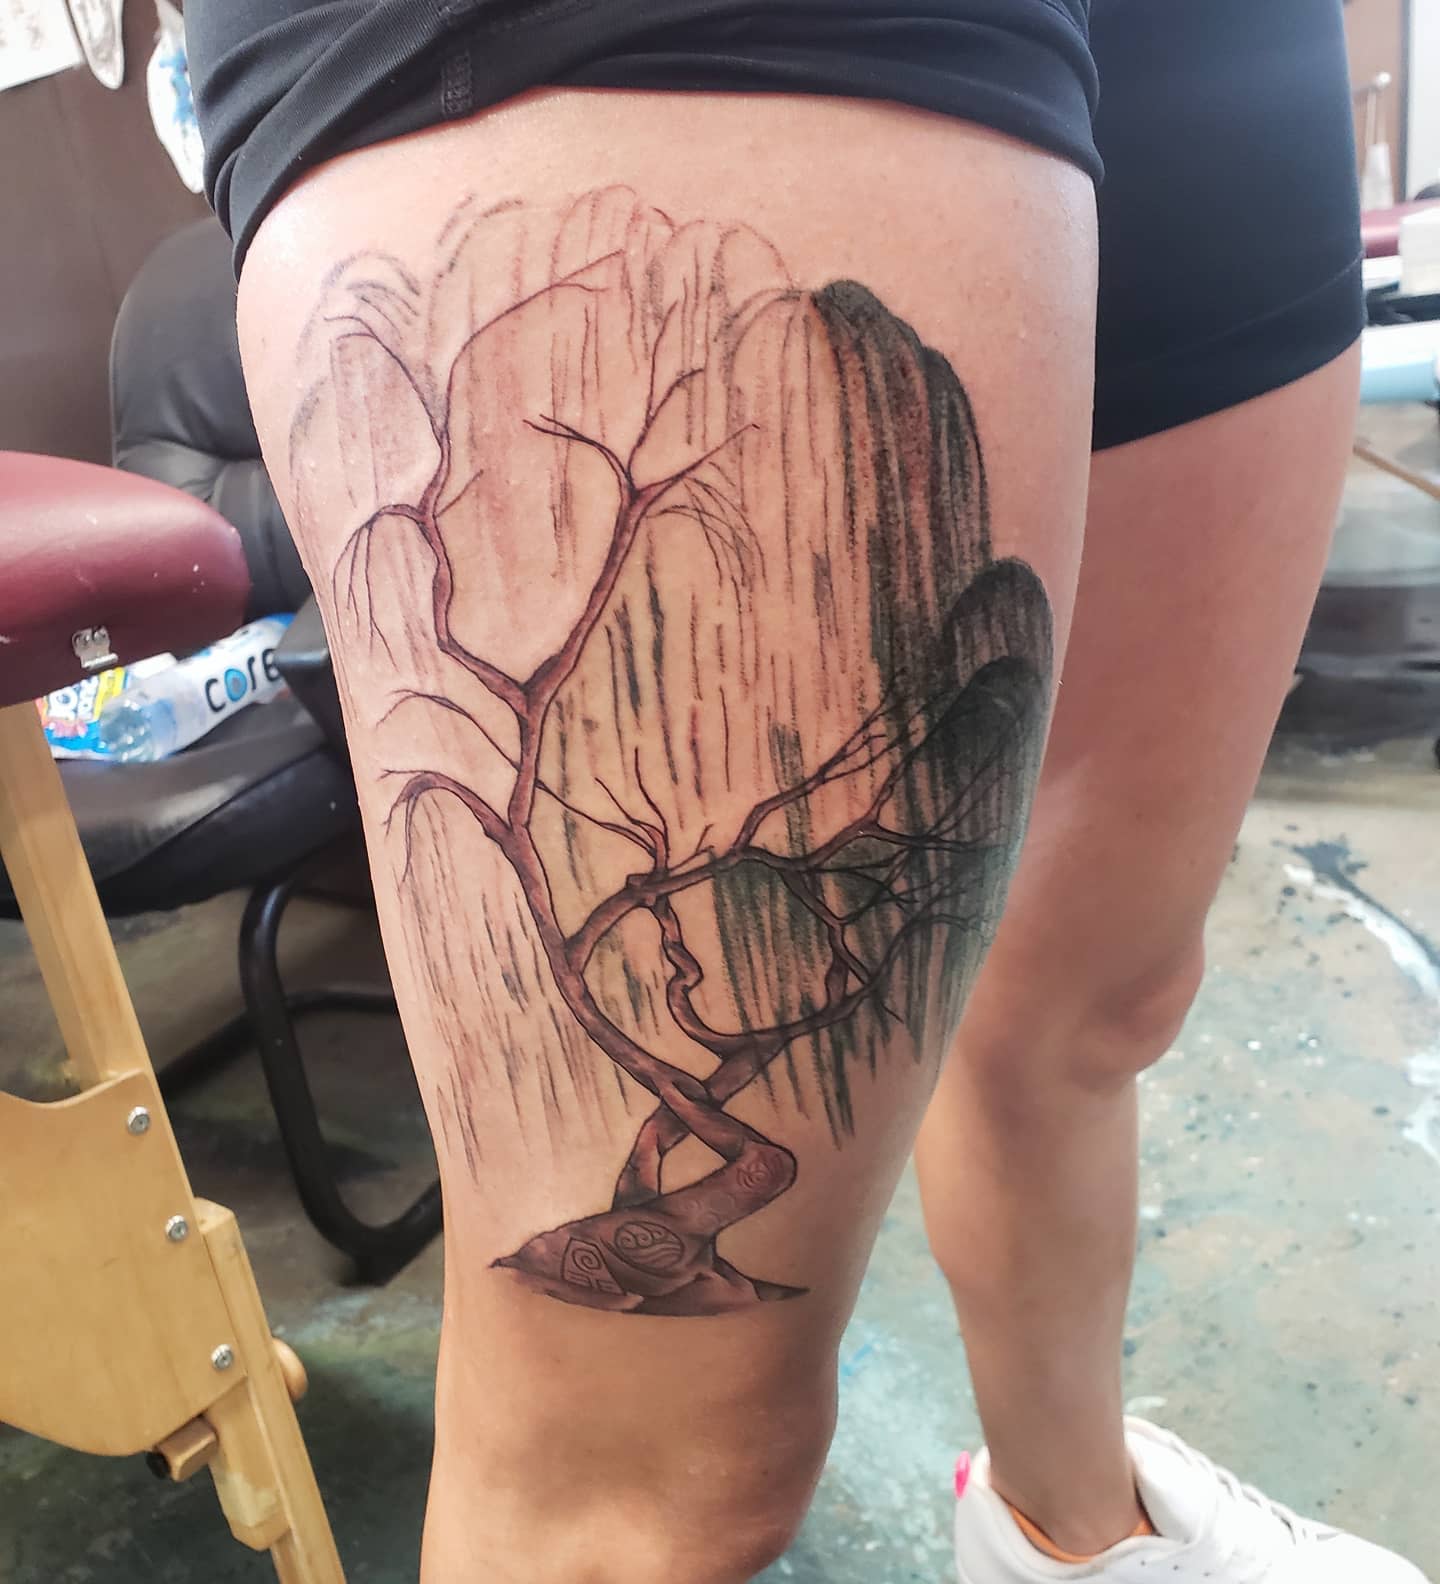 5. TATTOO OF A WILLOW TREE